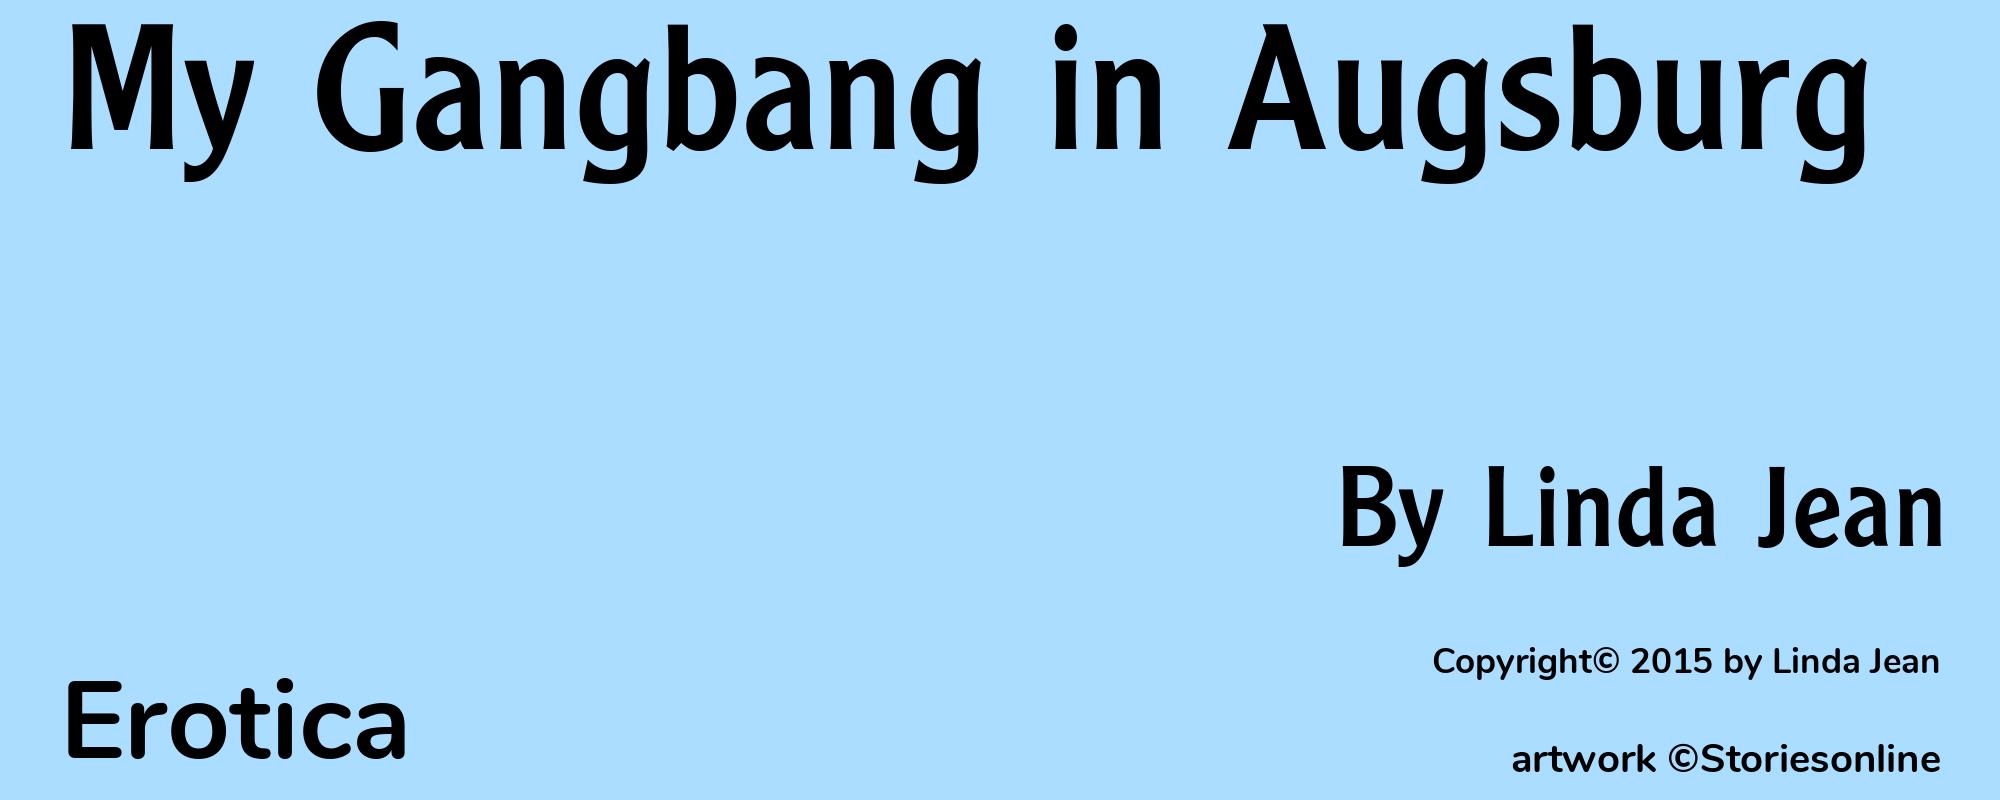 My Gangbang in Augsburg - Cover